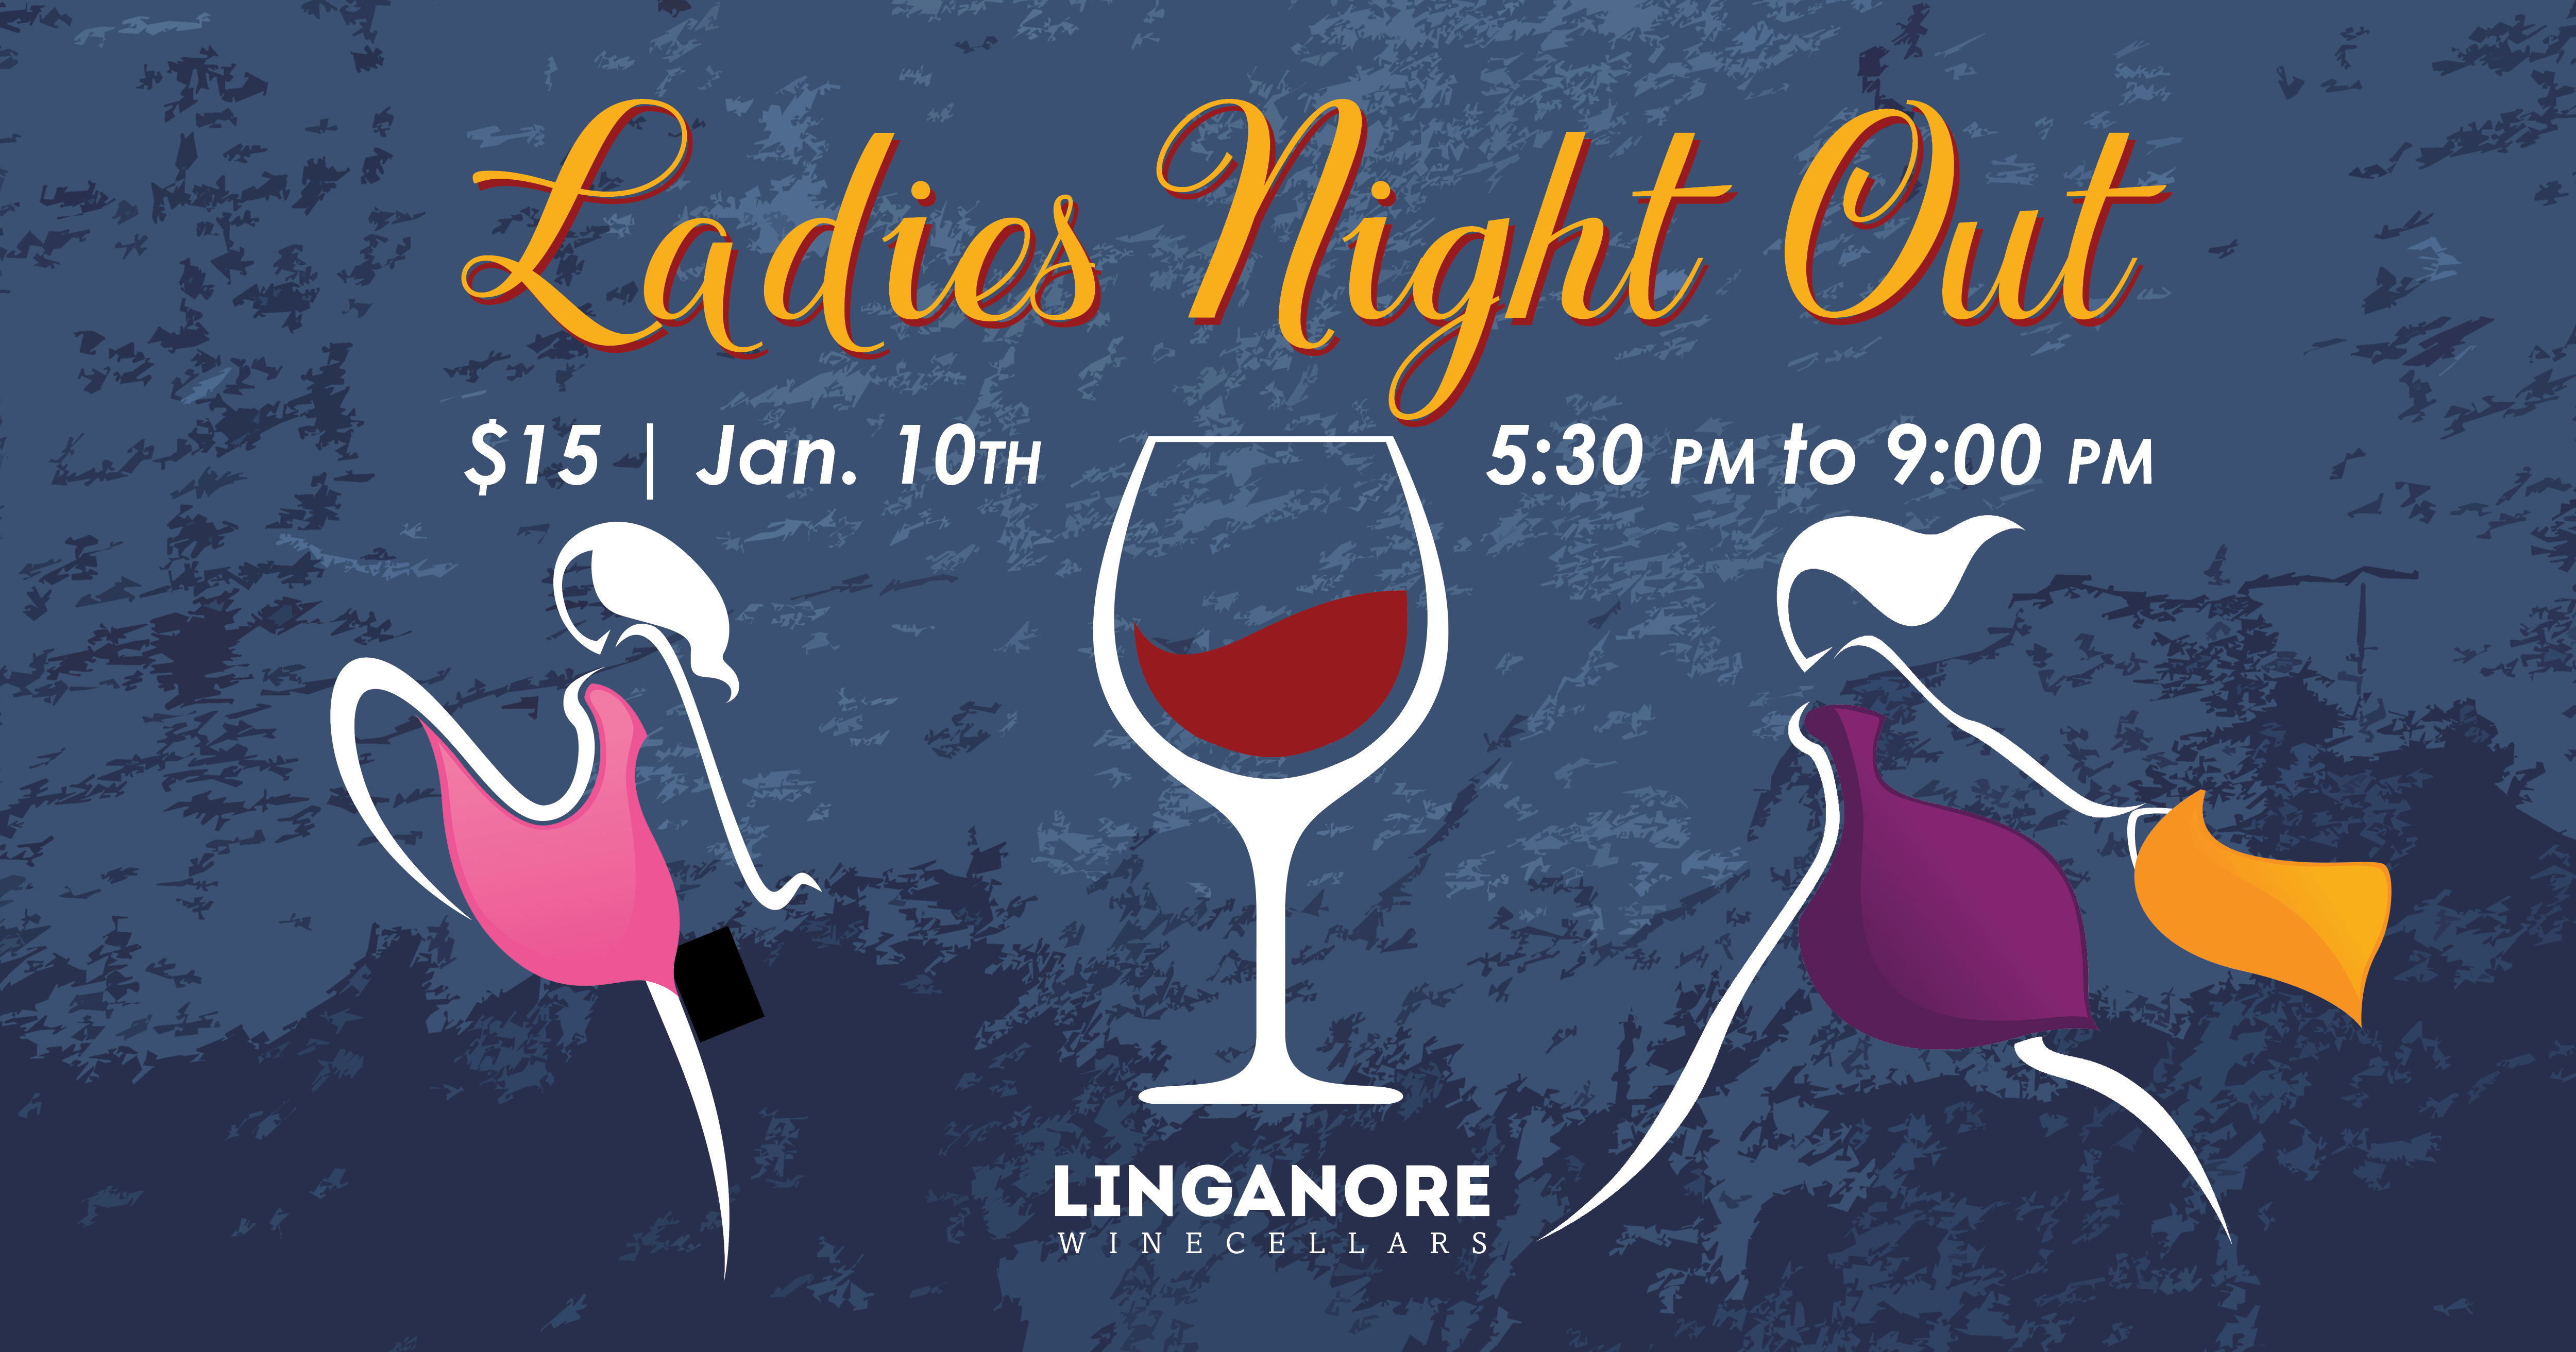 Ladies NIght Out January 10th at 5:30pm